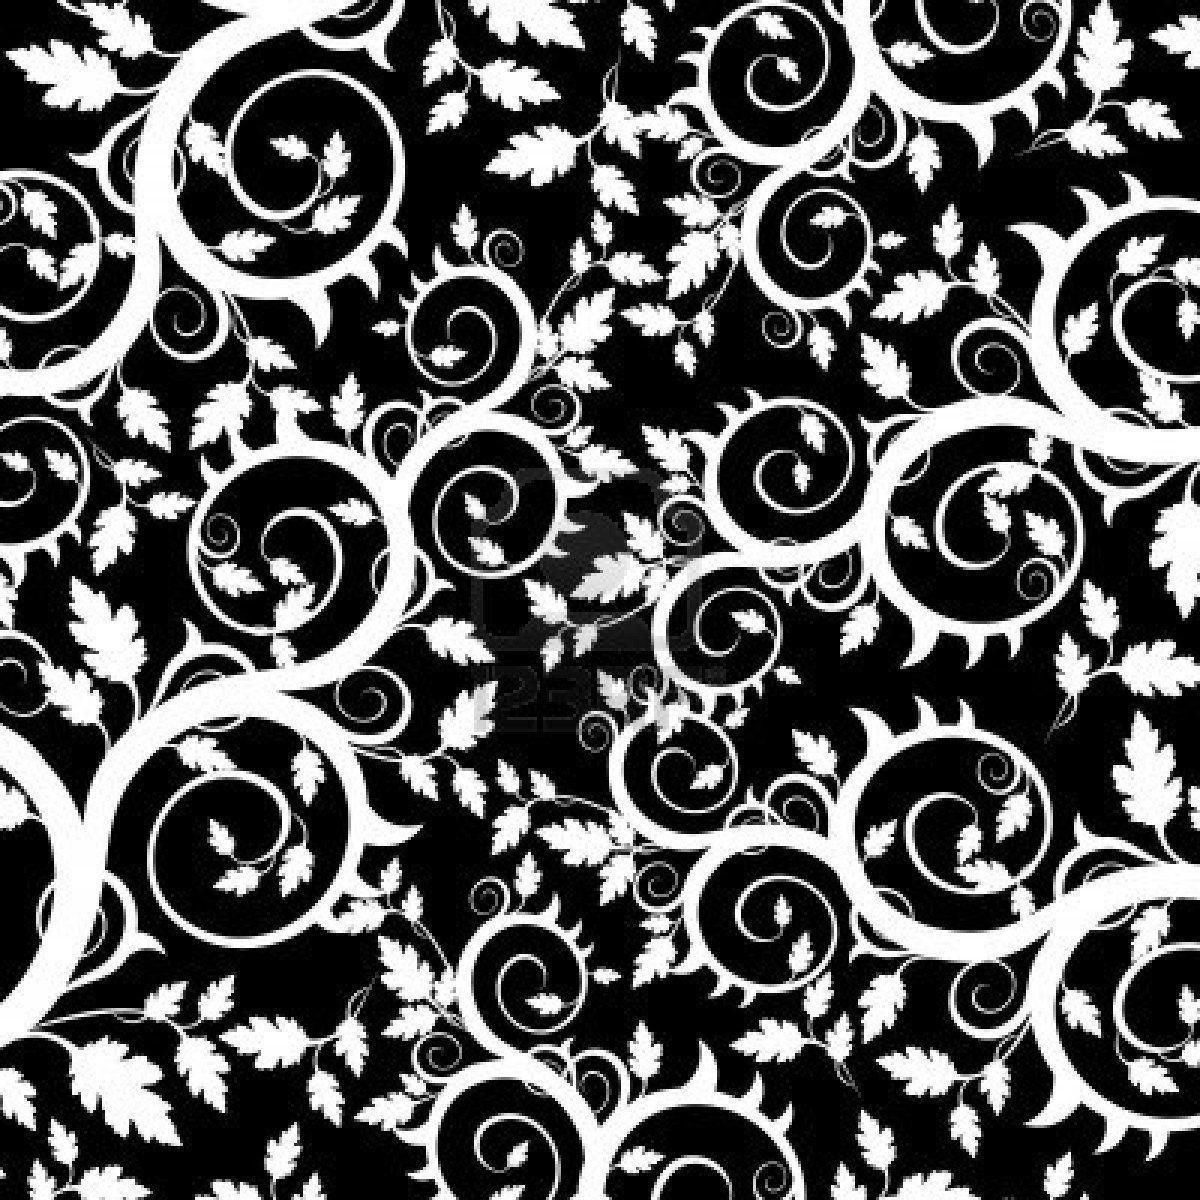 Flower Black And White Background Widescreen 2 HD Wallpaper. lzamgs